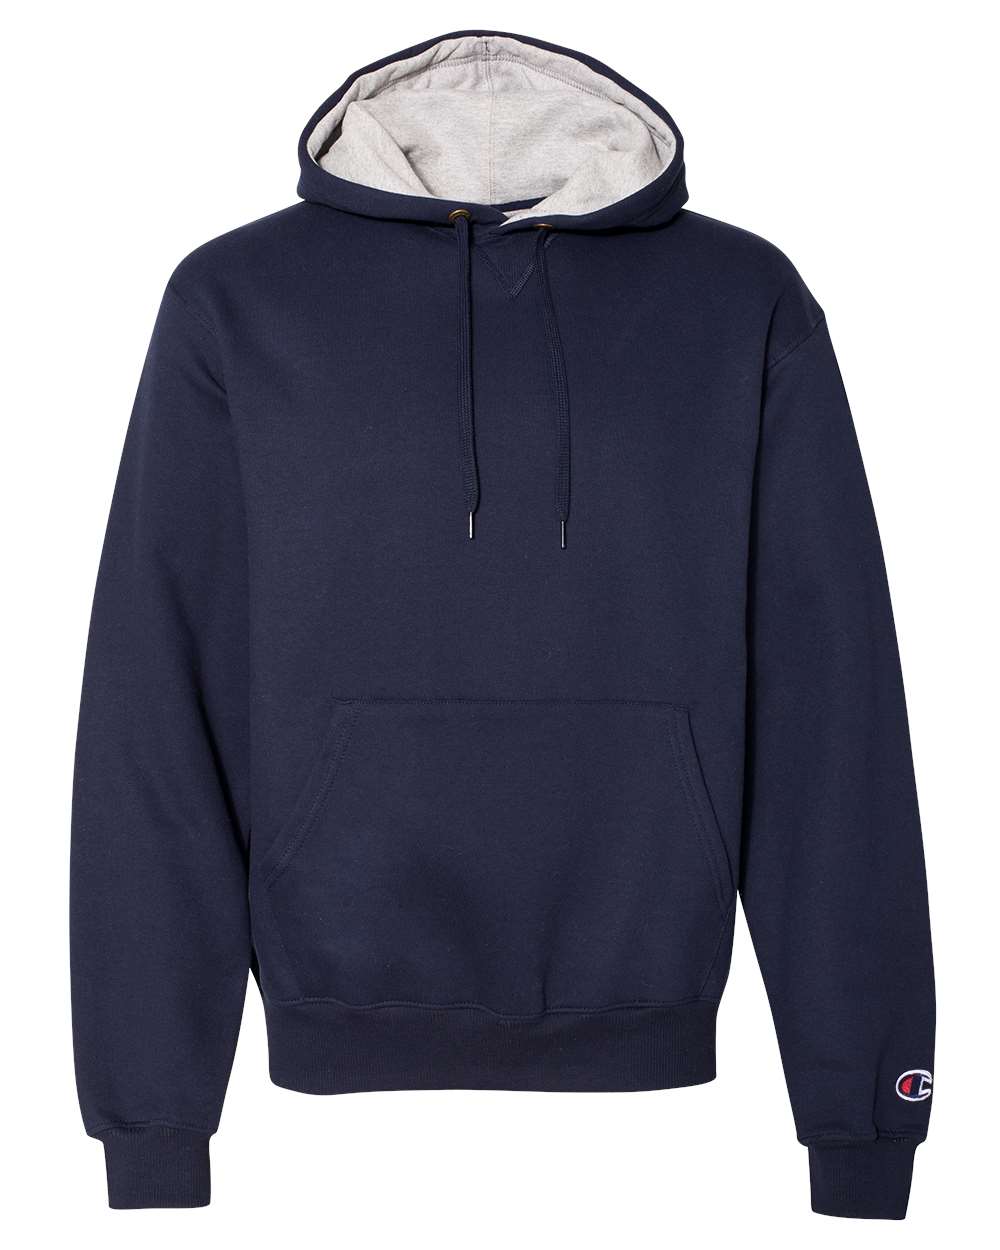 Champion Mens Cotton Max Hooded Sweatshirt Hoodie Pullover S171 up to ...